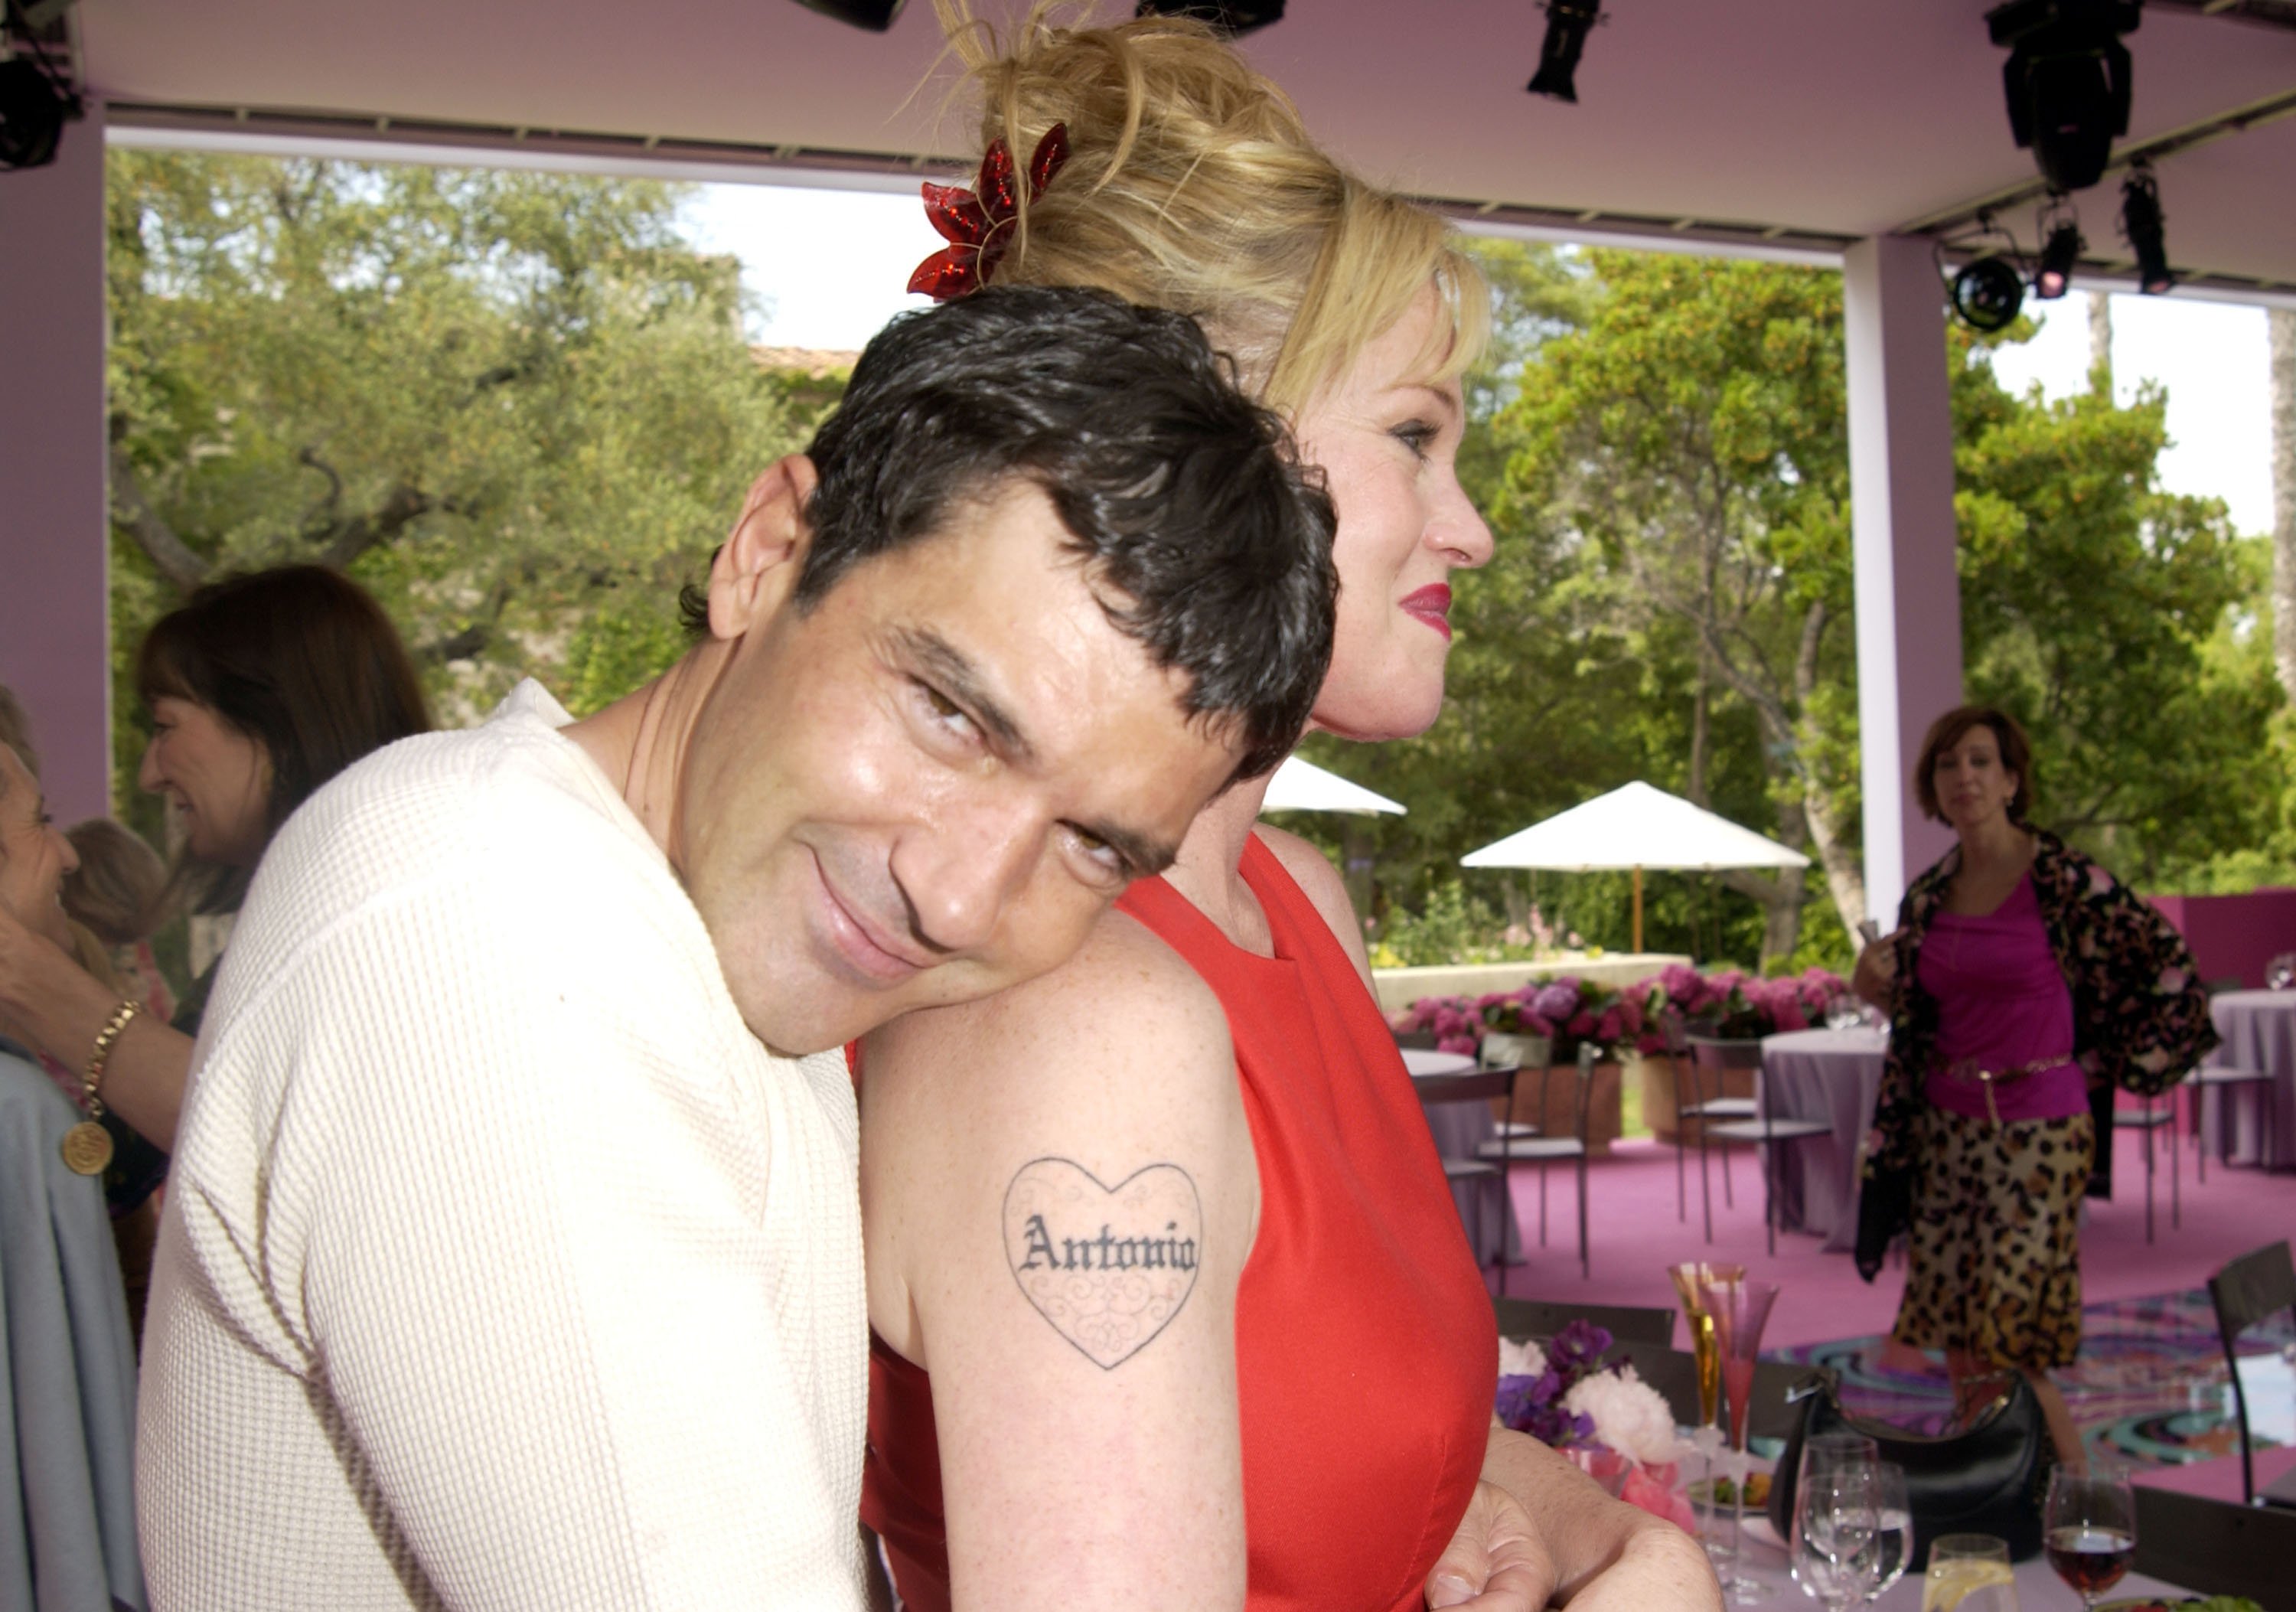 Antonio Banderas and Melanie Griffith during Versace Luncheon to Benefit Children's Action Network-Westside Children's Center Sponsored By "InStyle" Magazine on May 30, 2002 at Private Home in Los Angeles, California | Source: Getty Images